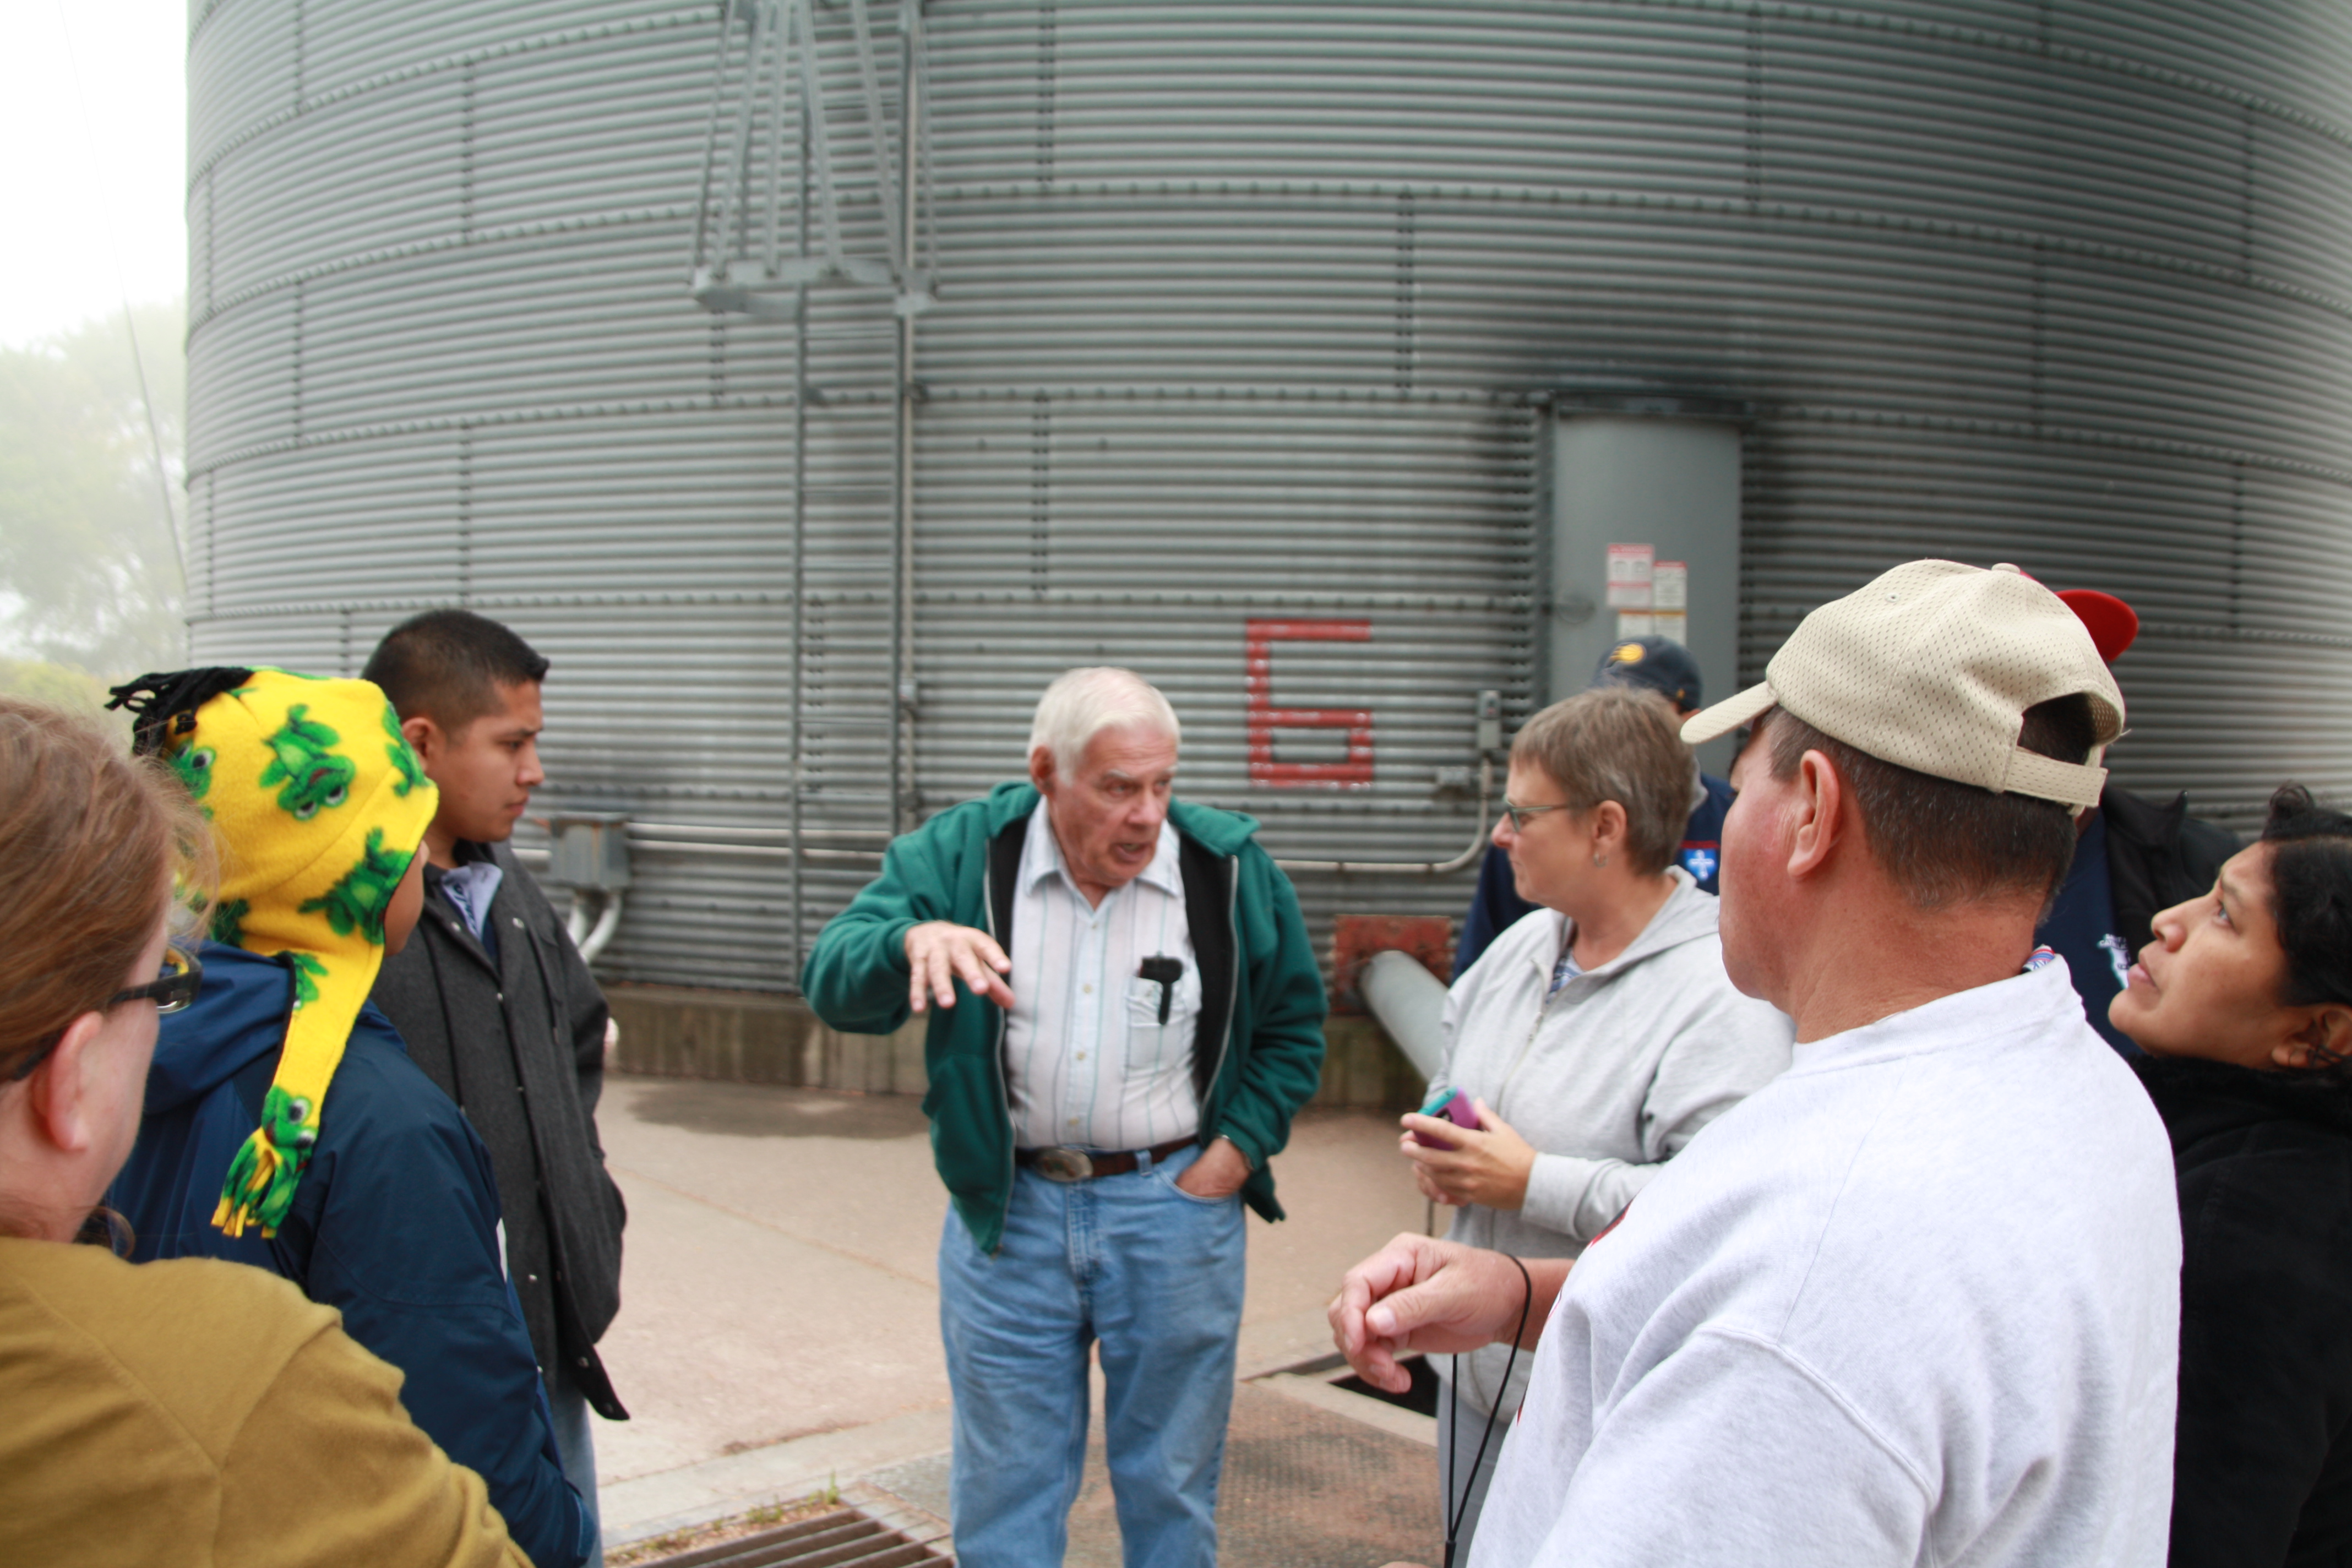 We had a farm tour this week with a group from Honduras.